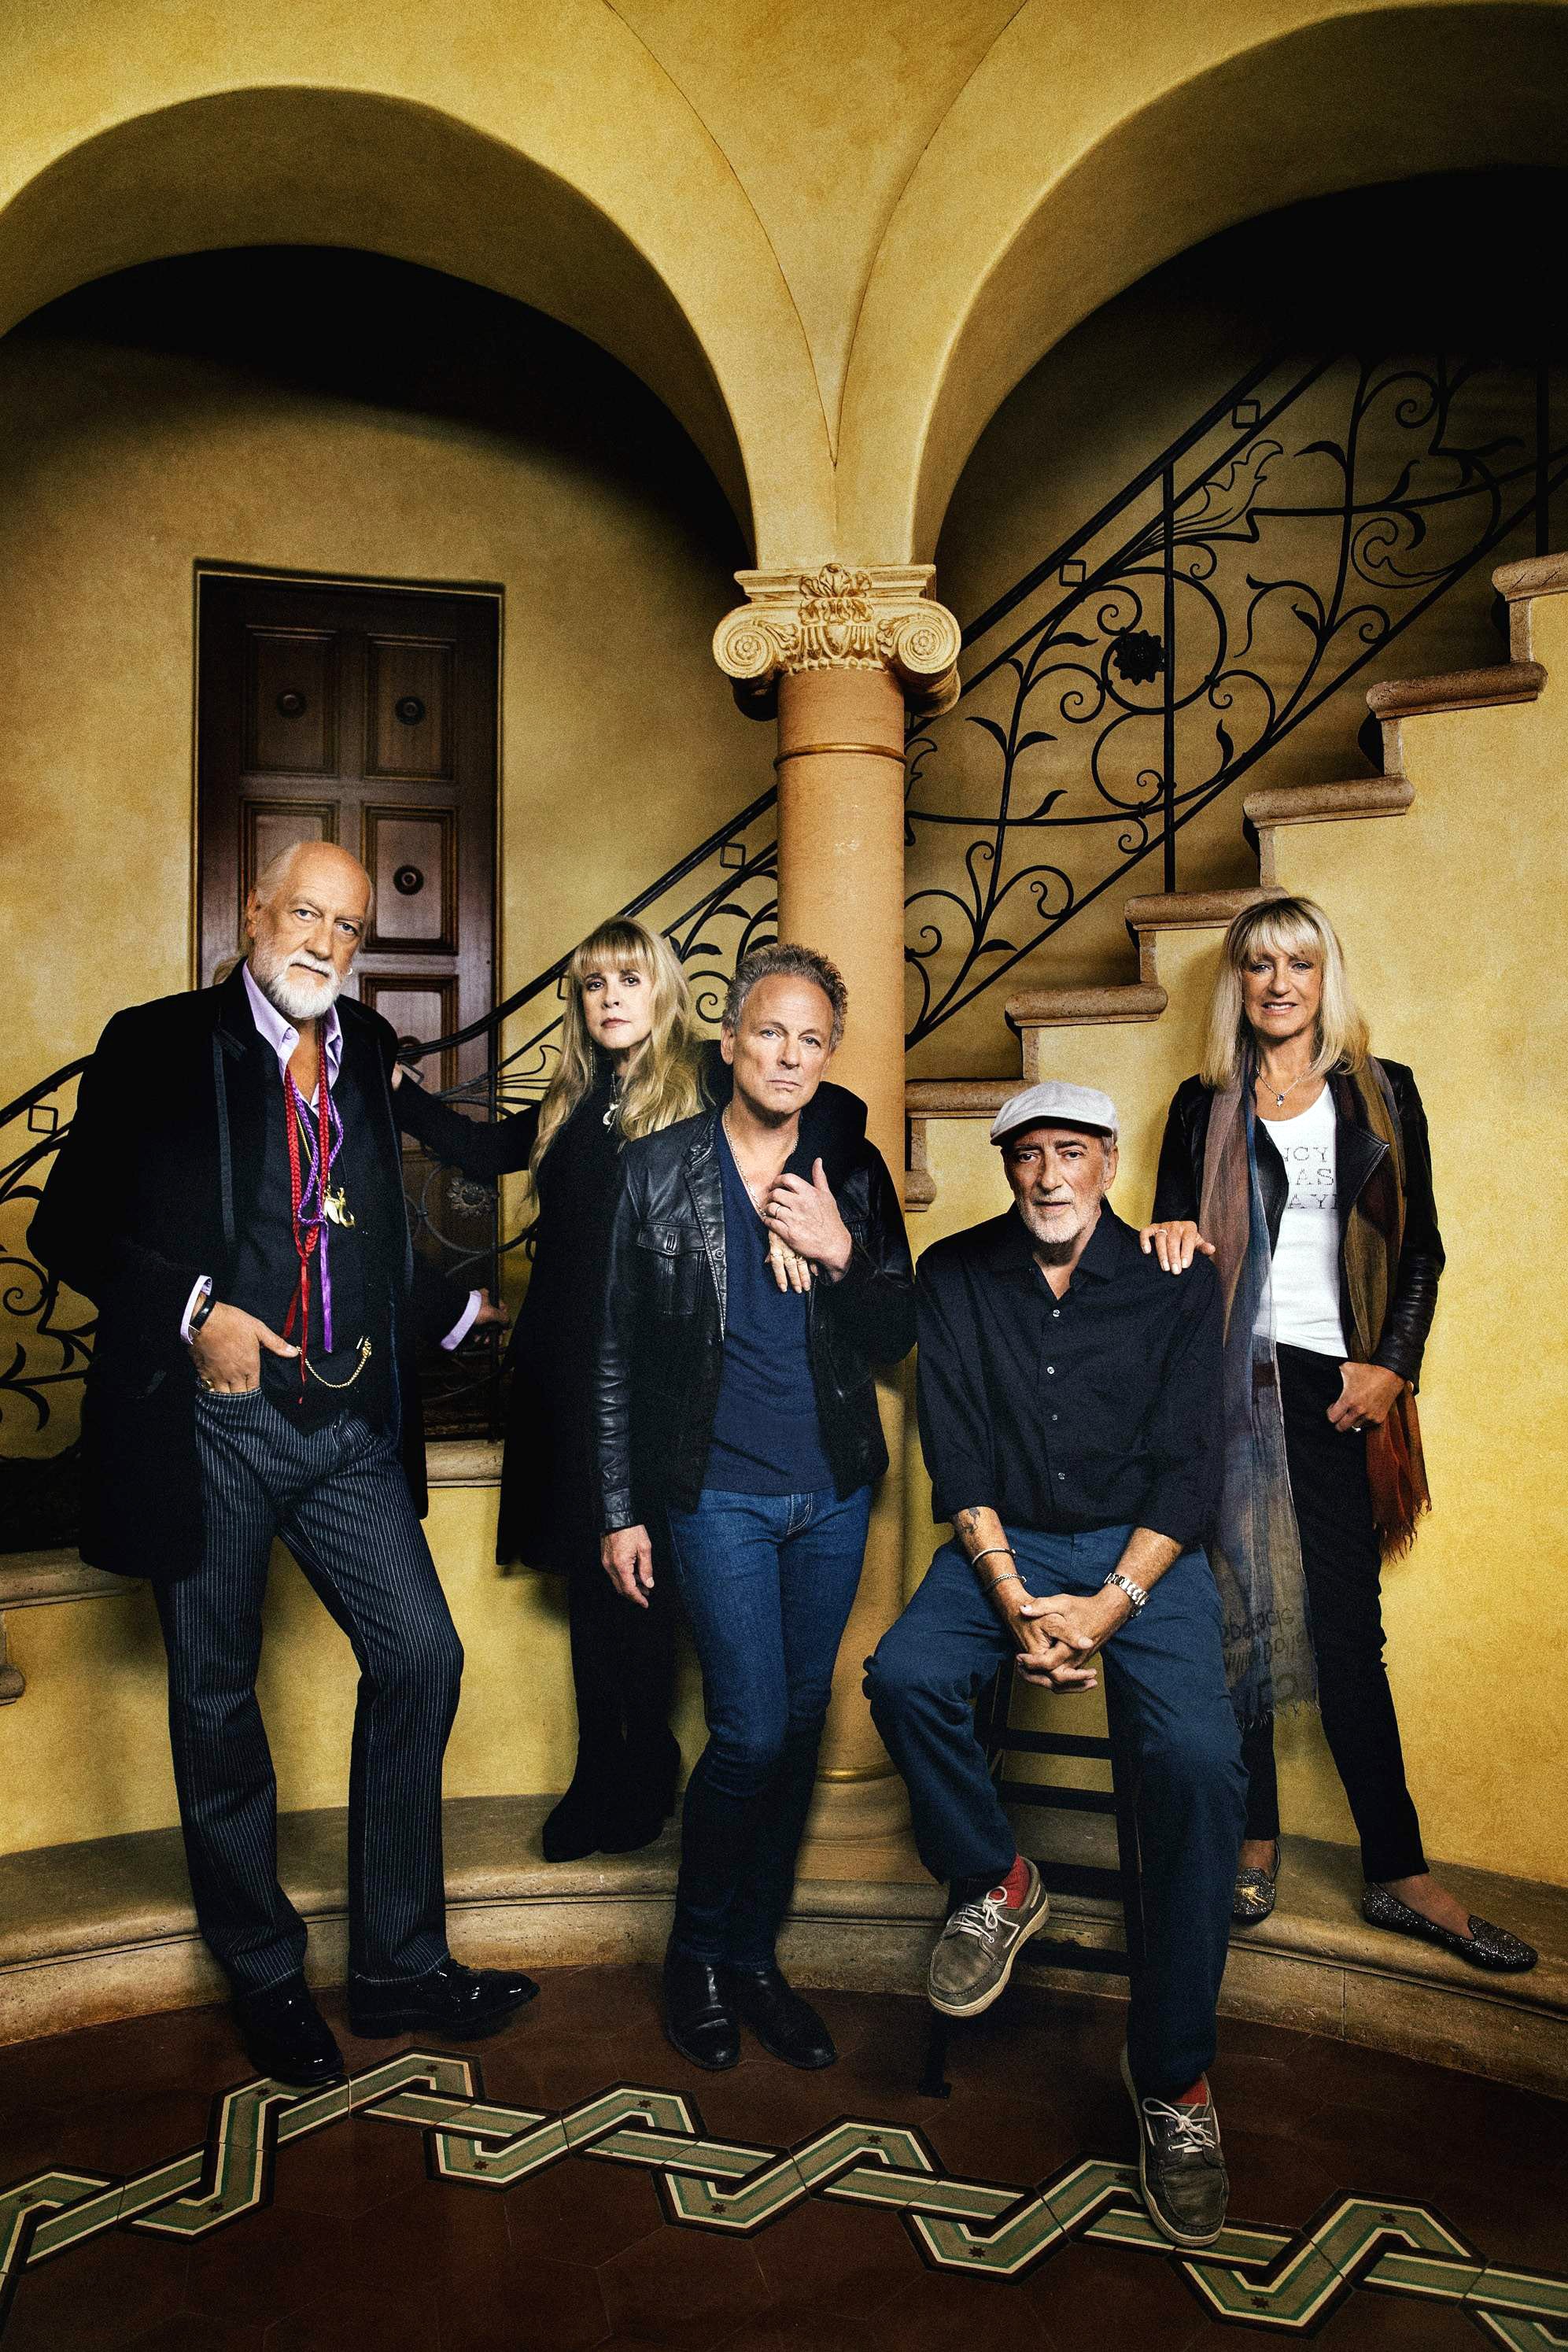 Christine McVie of Fleetwood Mac passed away on November 30. Here’s a look at all the band members’ net worths ... who’s the richest of them all after all these years? Photo: Handout